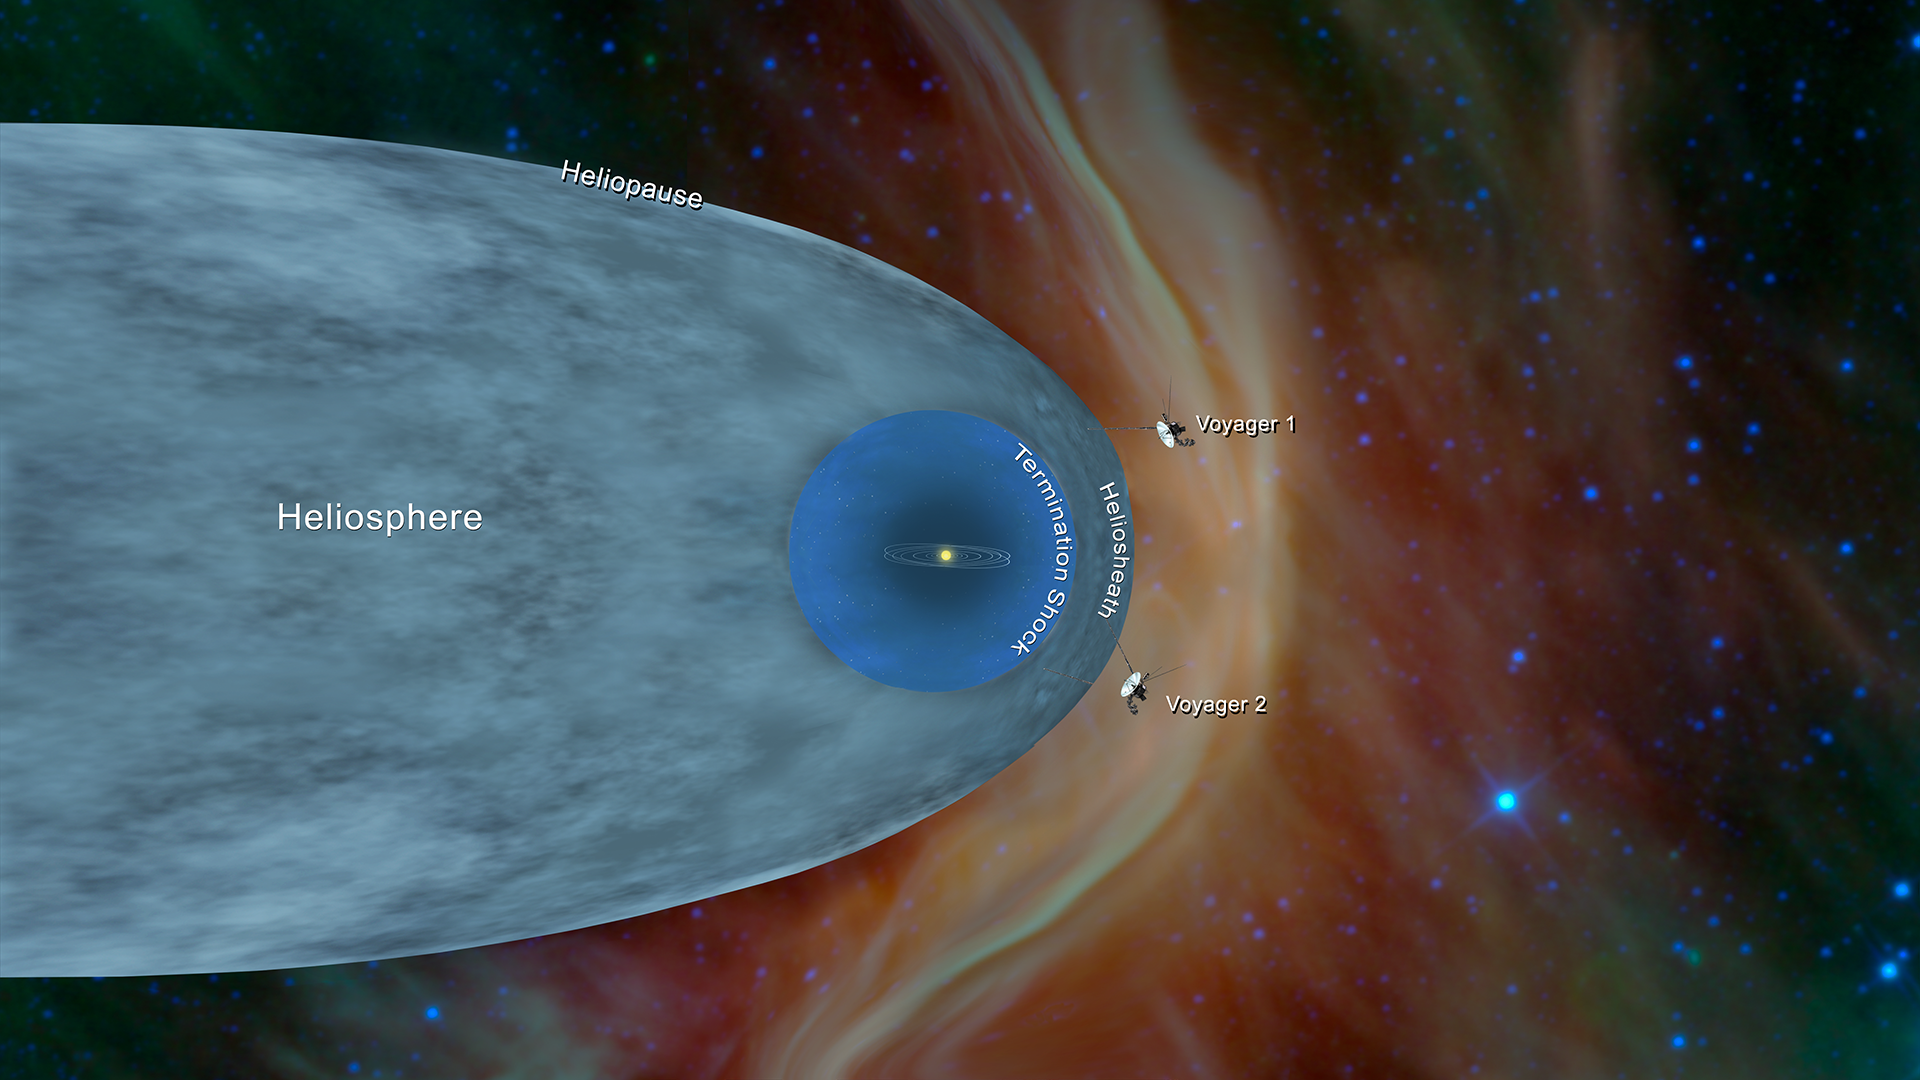 This illustration shows the position of NASA’s Voyager 1 and Voyager 2 probes outside the solar system’s heliosphere.